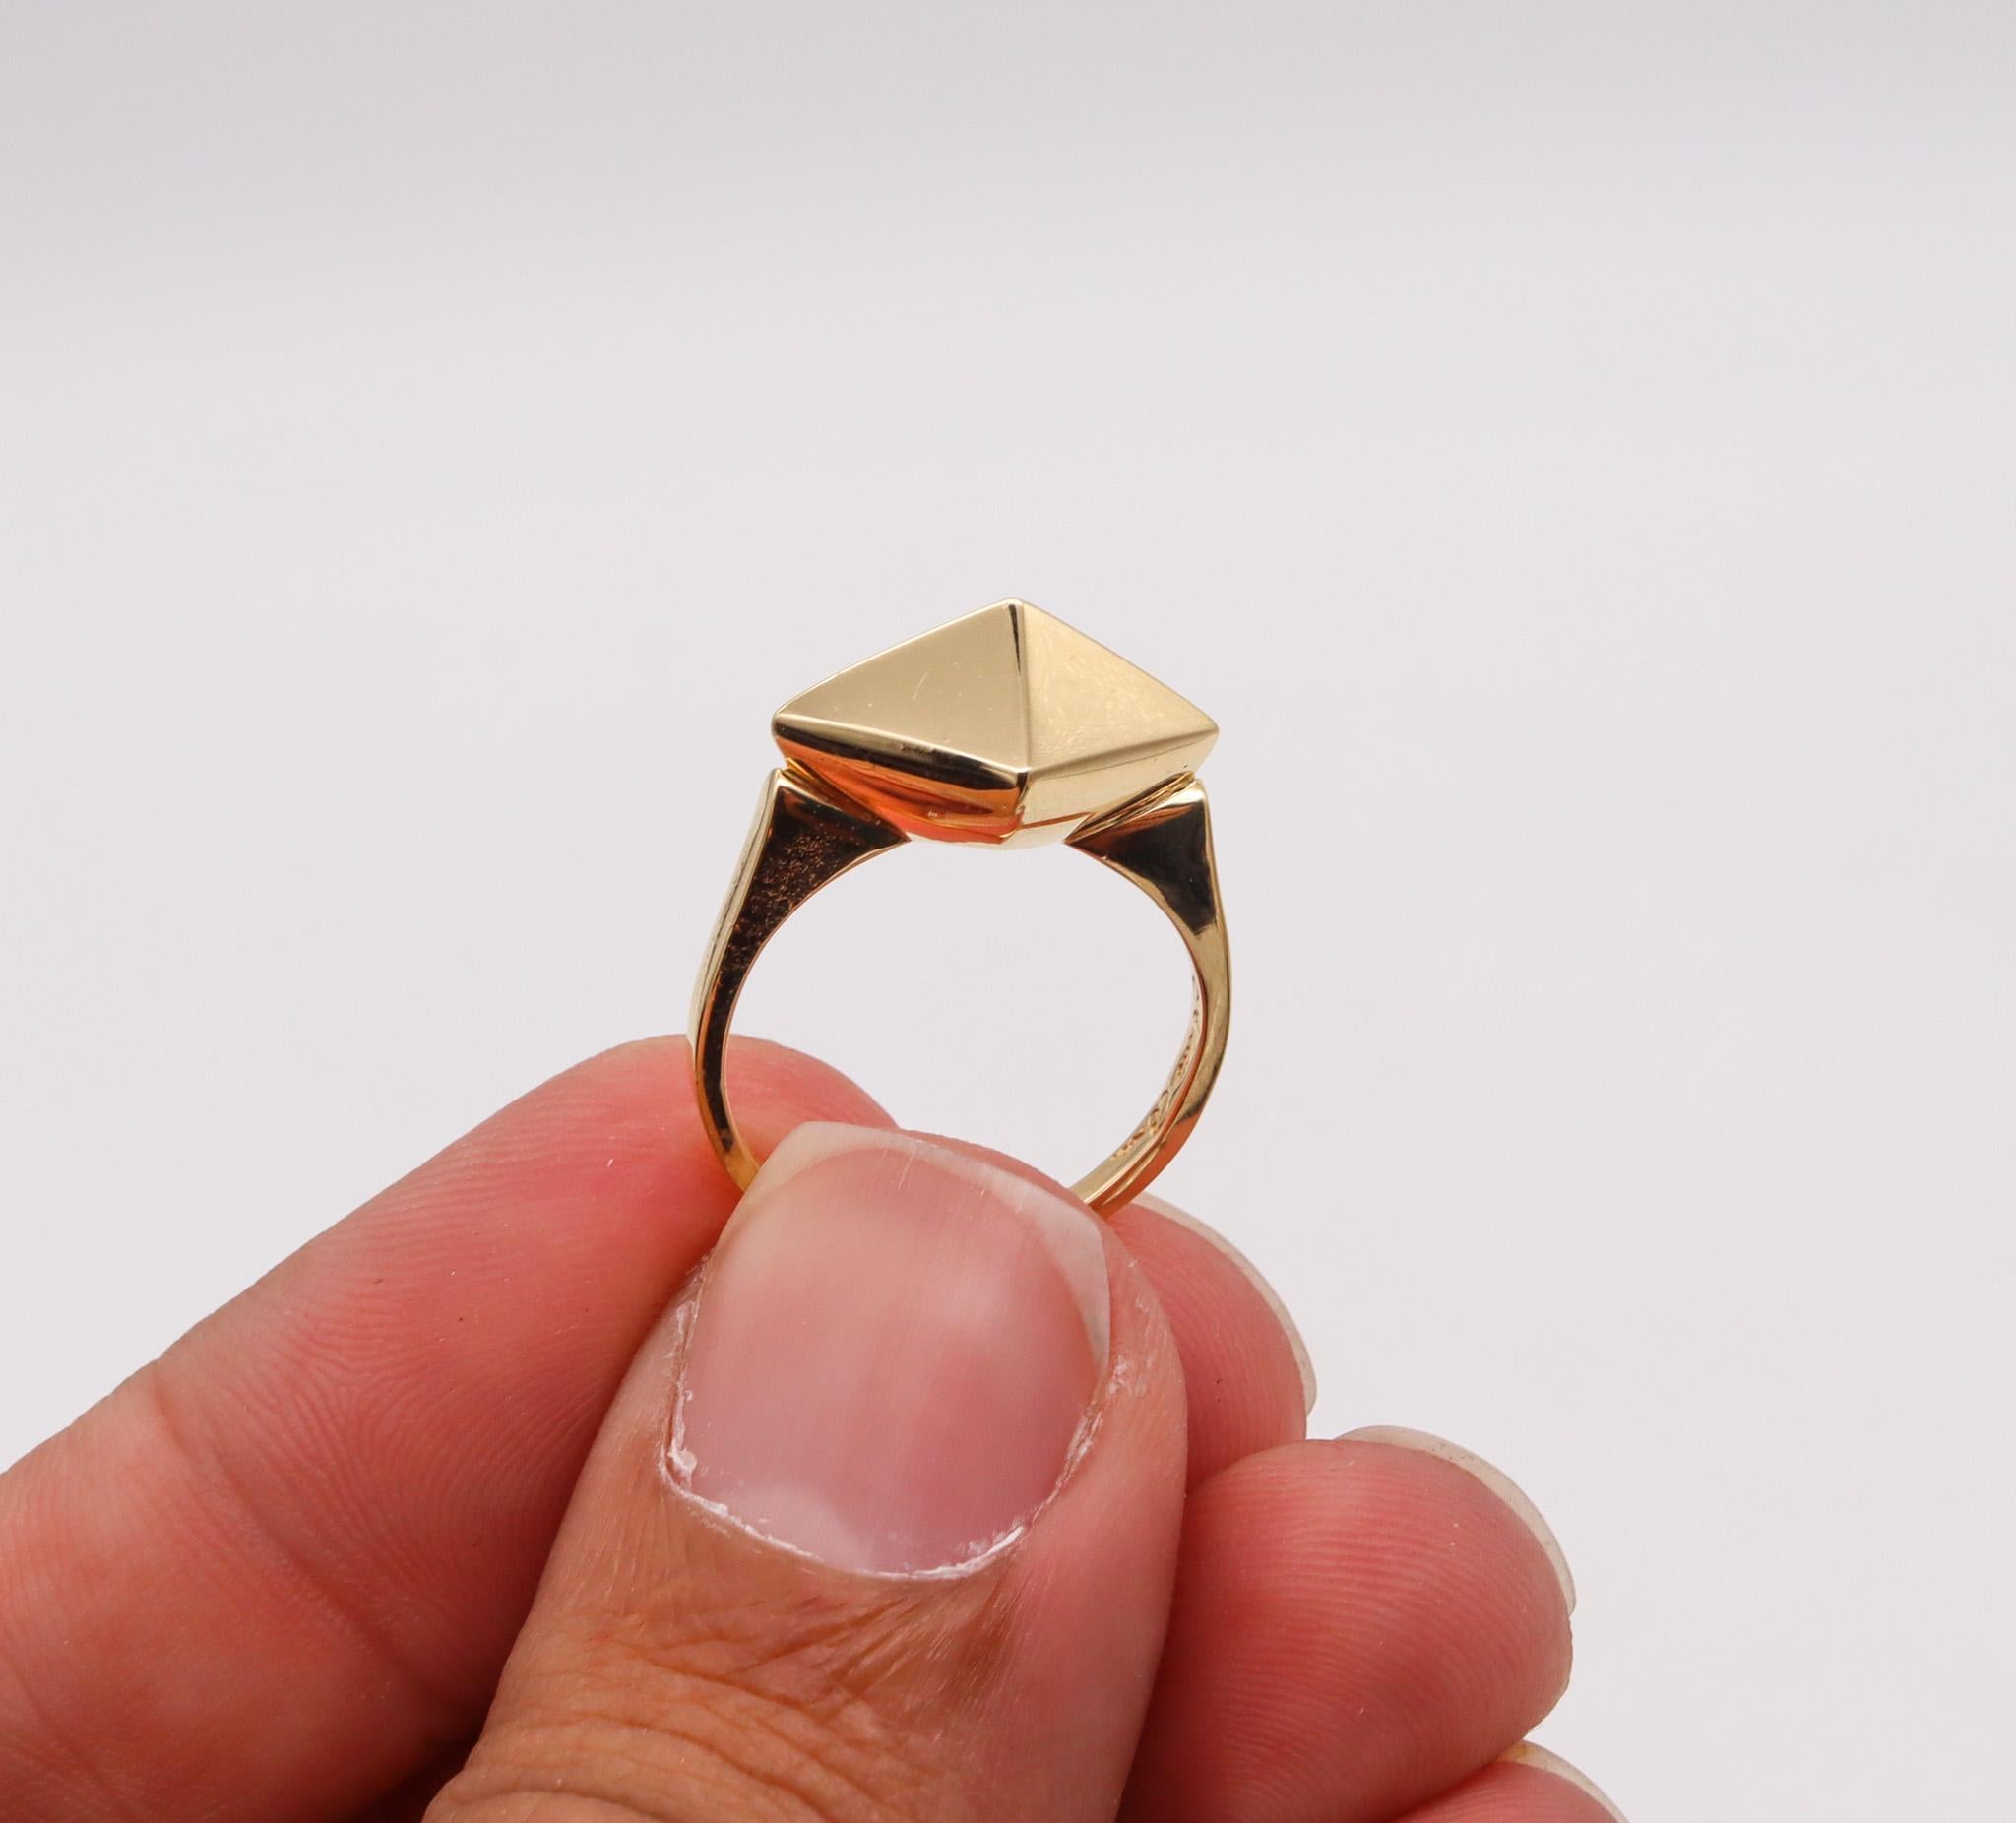 Aletto Brothers Stackable Medium Rhomboid Geometric Ring in 18kt Yellow Gold In New Condition For Sale In Miami, FL